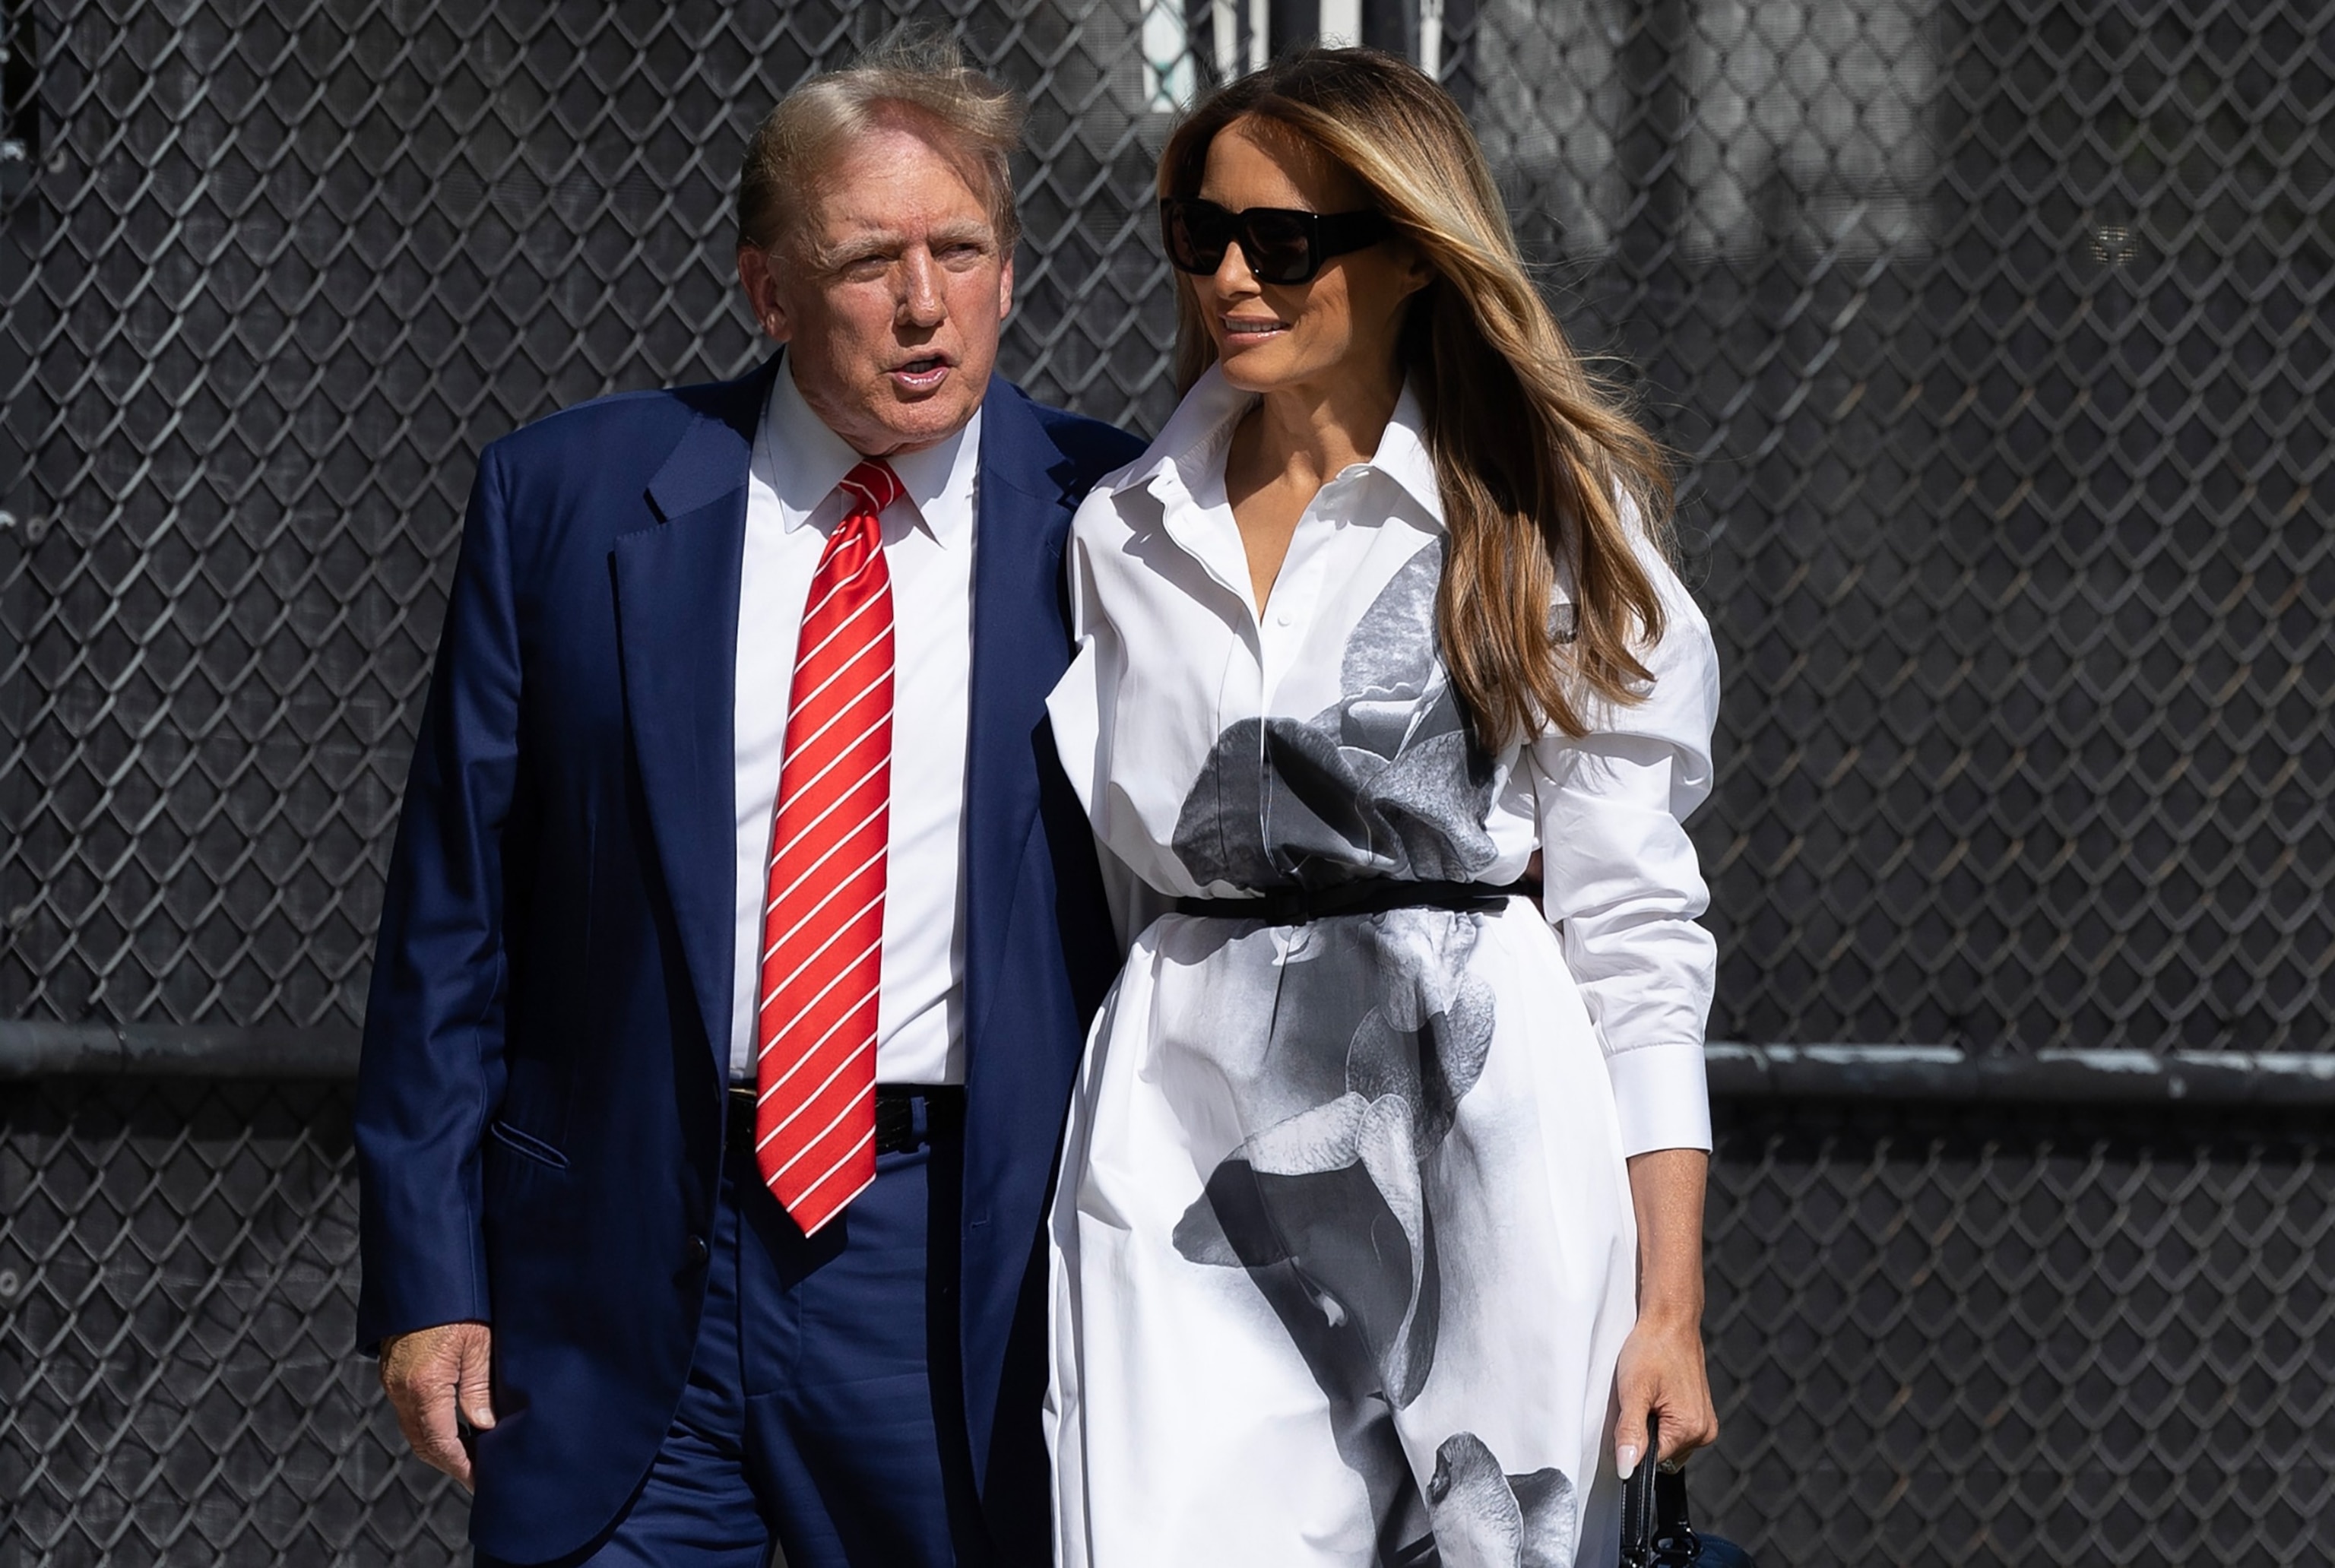 PHOTO: Former U.S. President Donald Trump and former first lady Melania Trump walk together as they prepare to vote at a polling station setup in the Morton and Barbara Mandel Recreation Center, Mar. 19, 2024, in Palm Beach, Fla.  